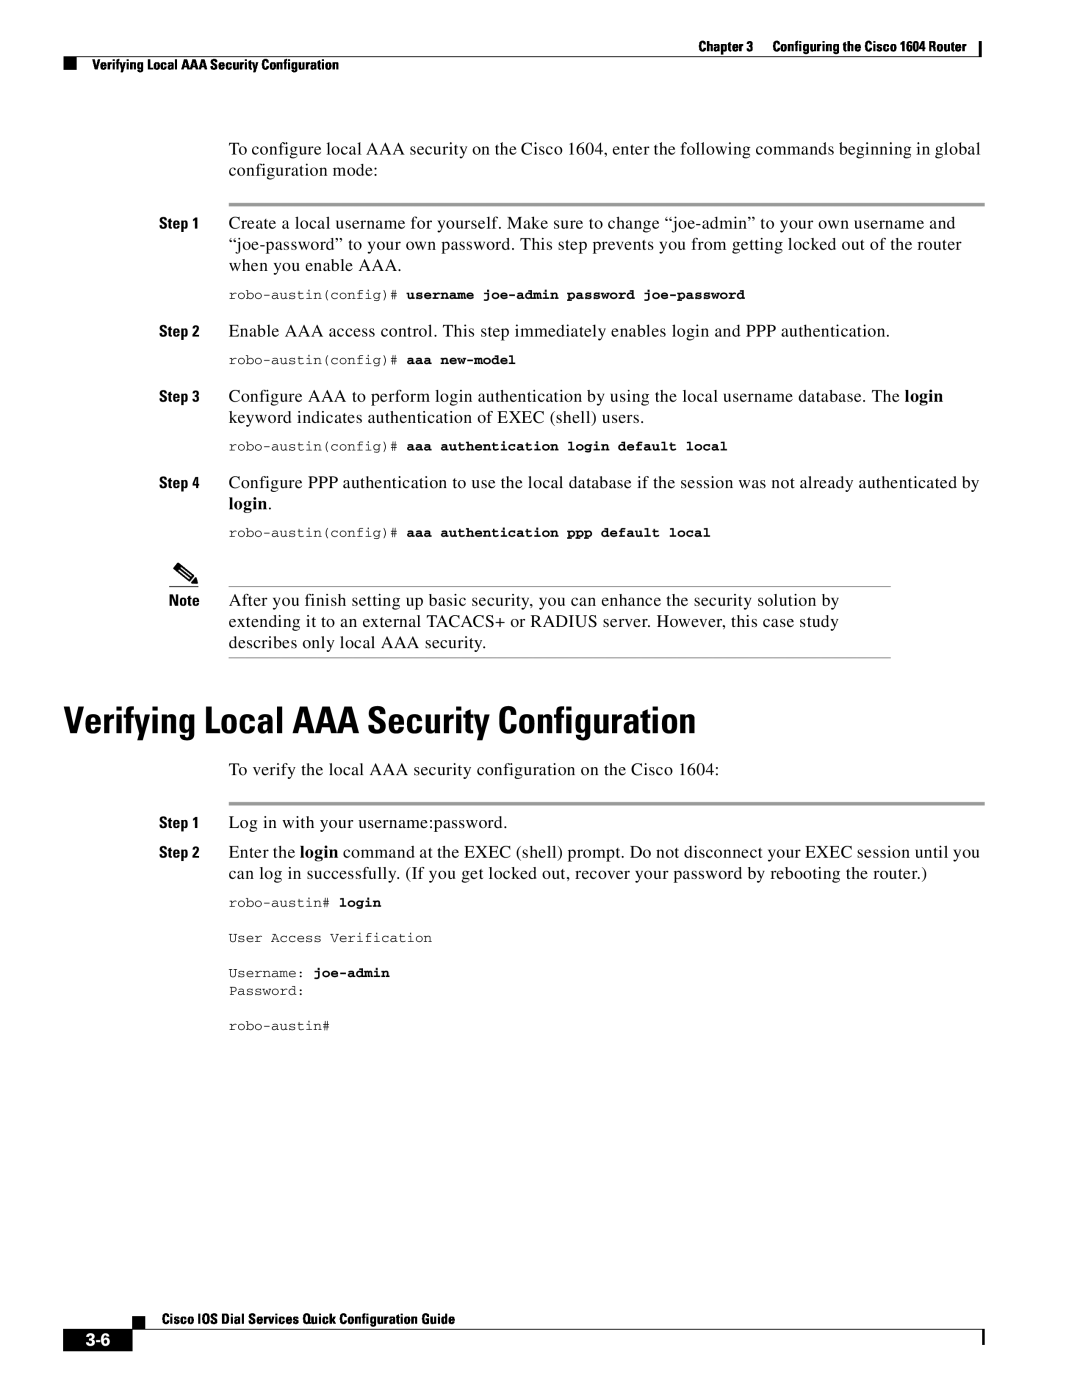 Cisco Systems 1604 manual Verifying Local AAA Security Configuration, login 